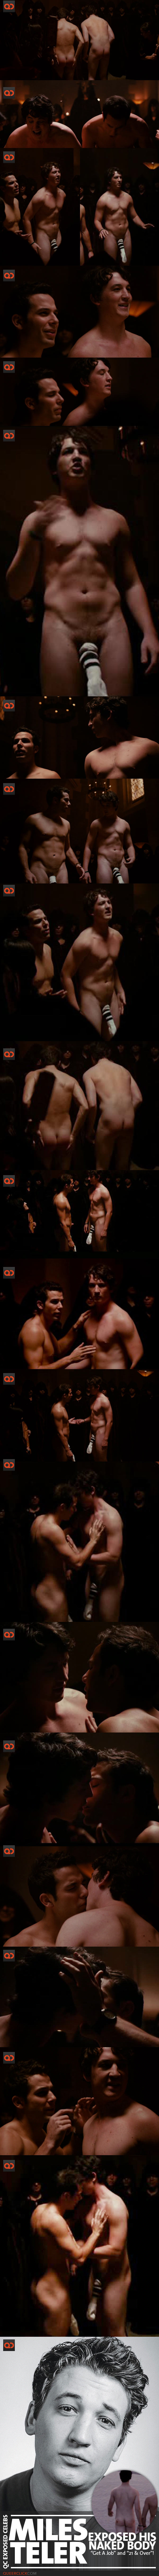 qc-miles_teller_naked_body_21_and_over_get_a_job-collage03